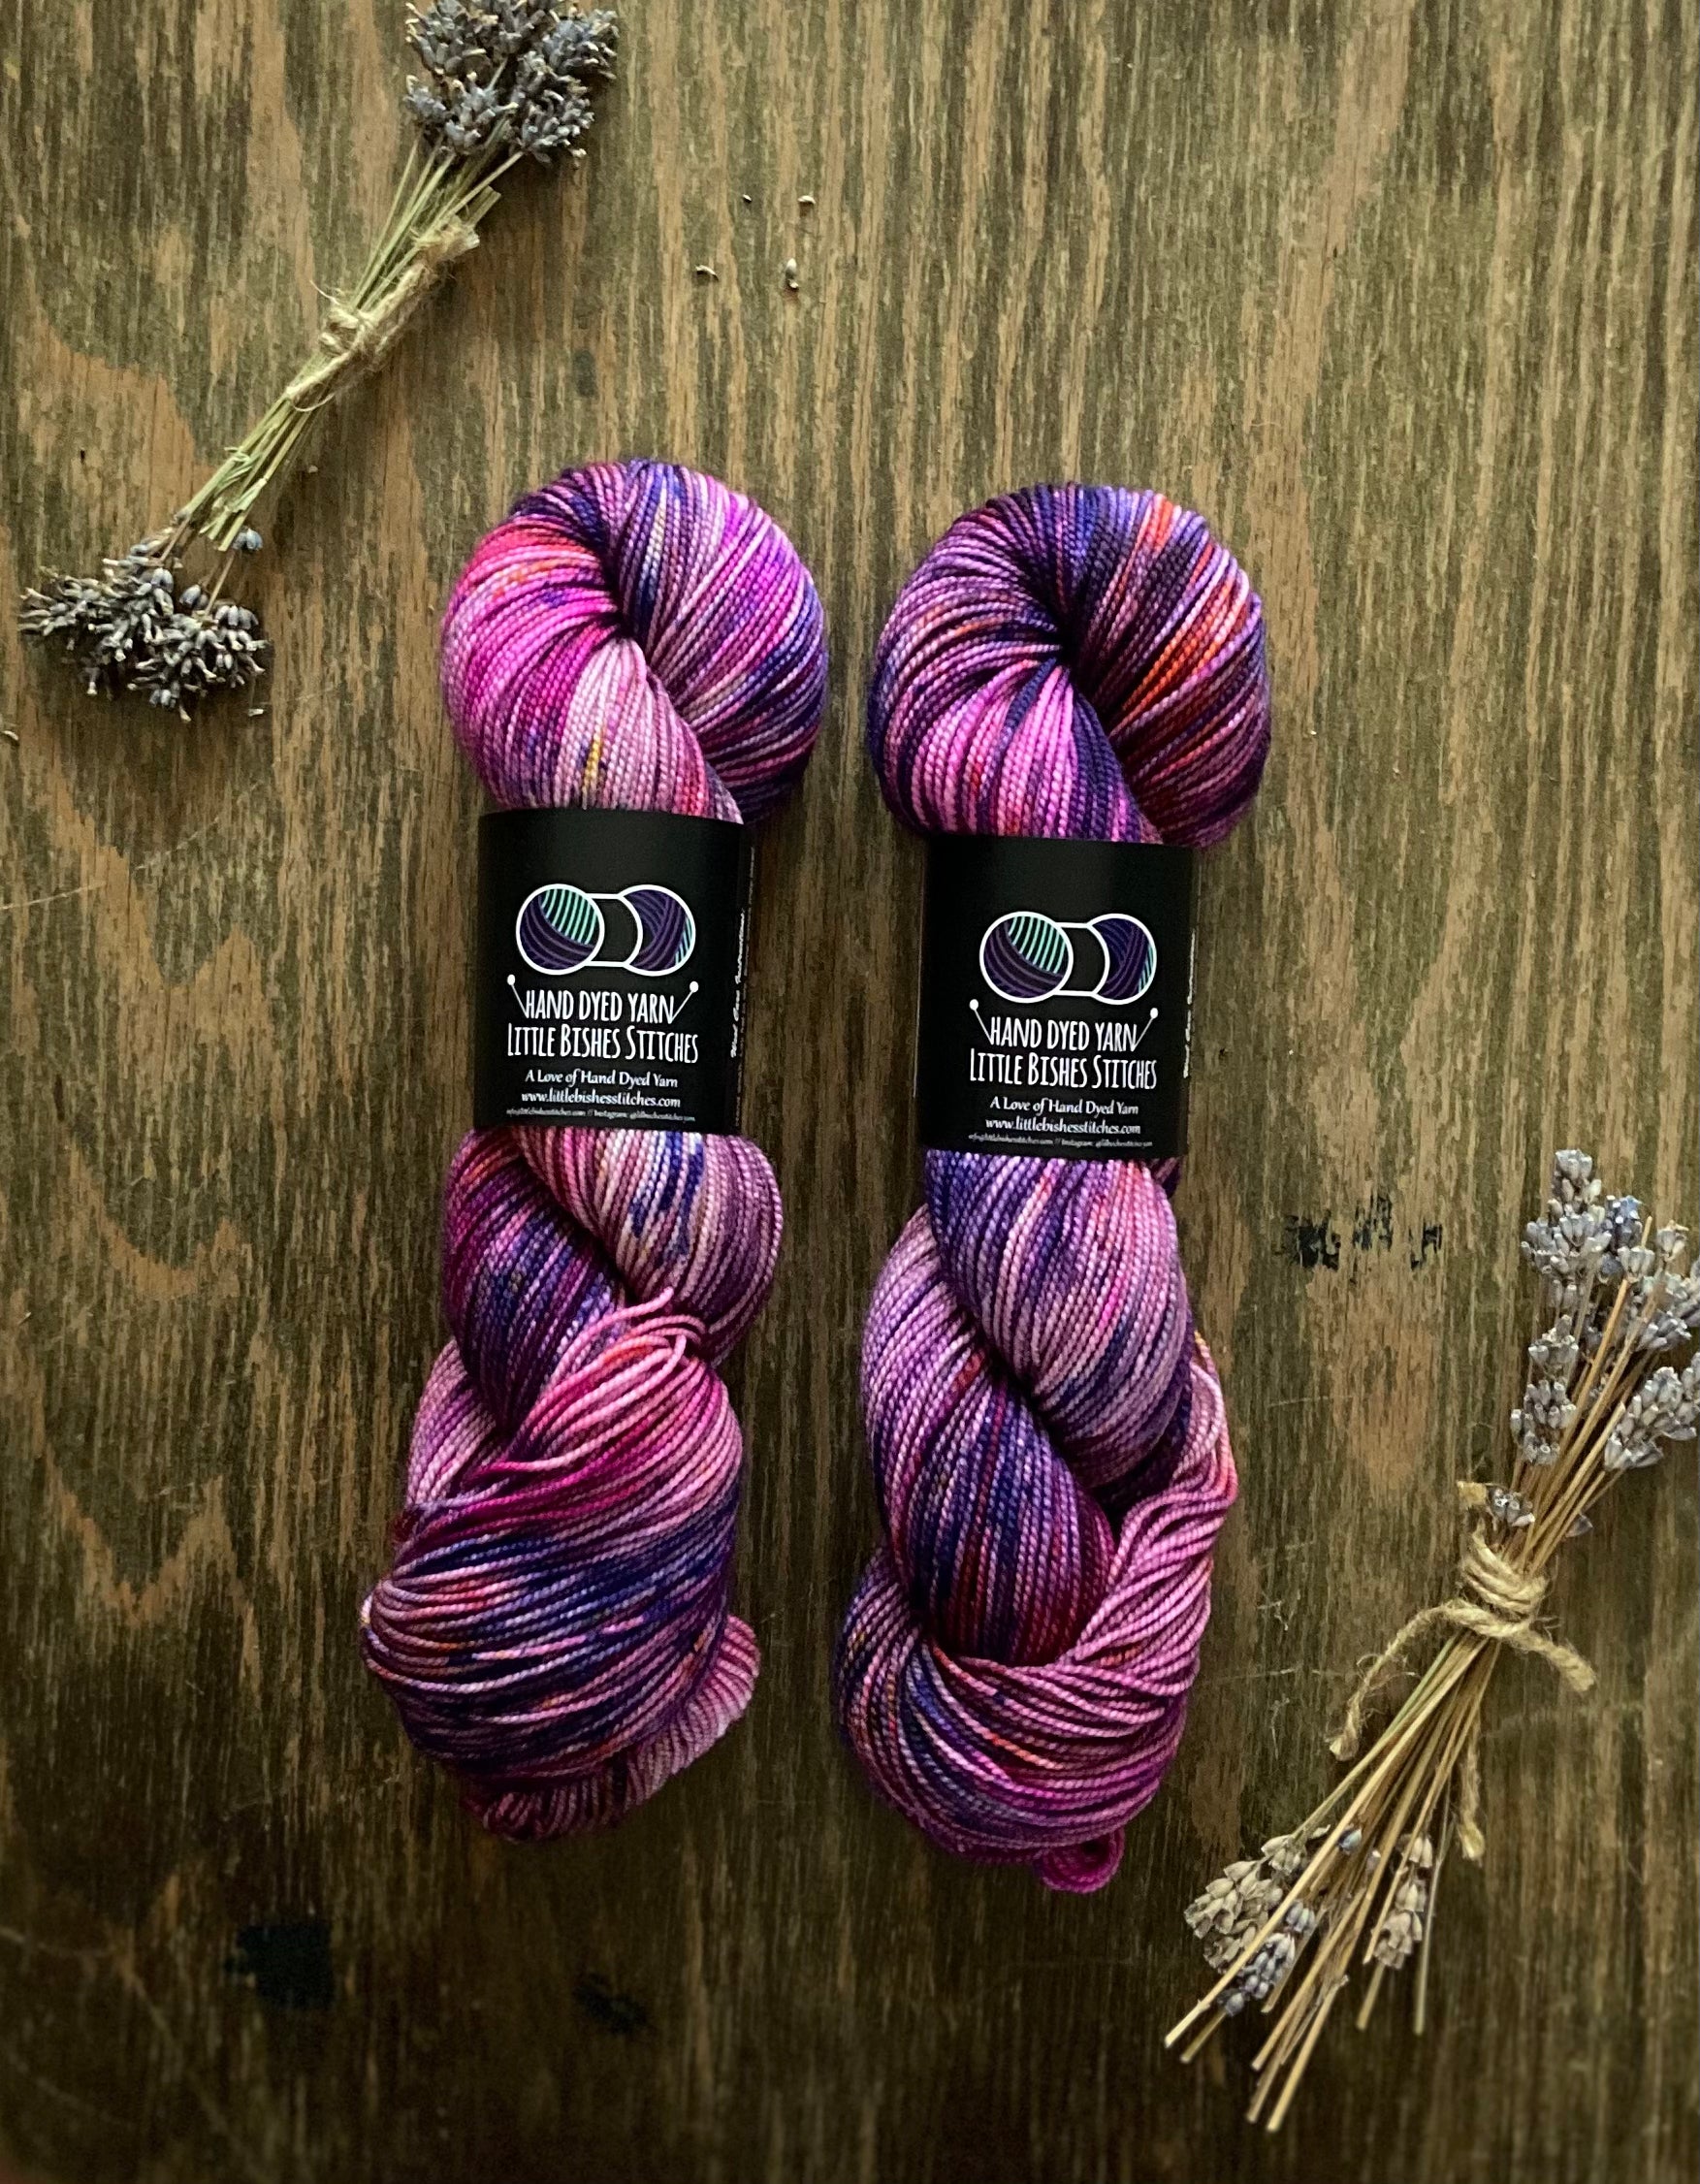 February Colorway Blind Date LUX Merino